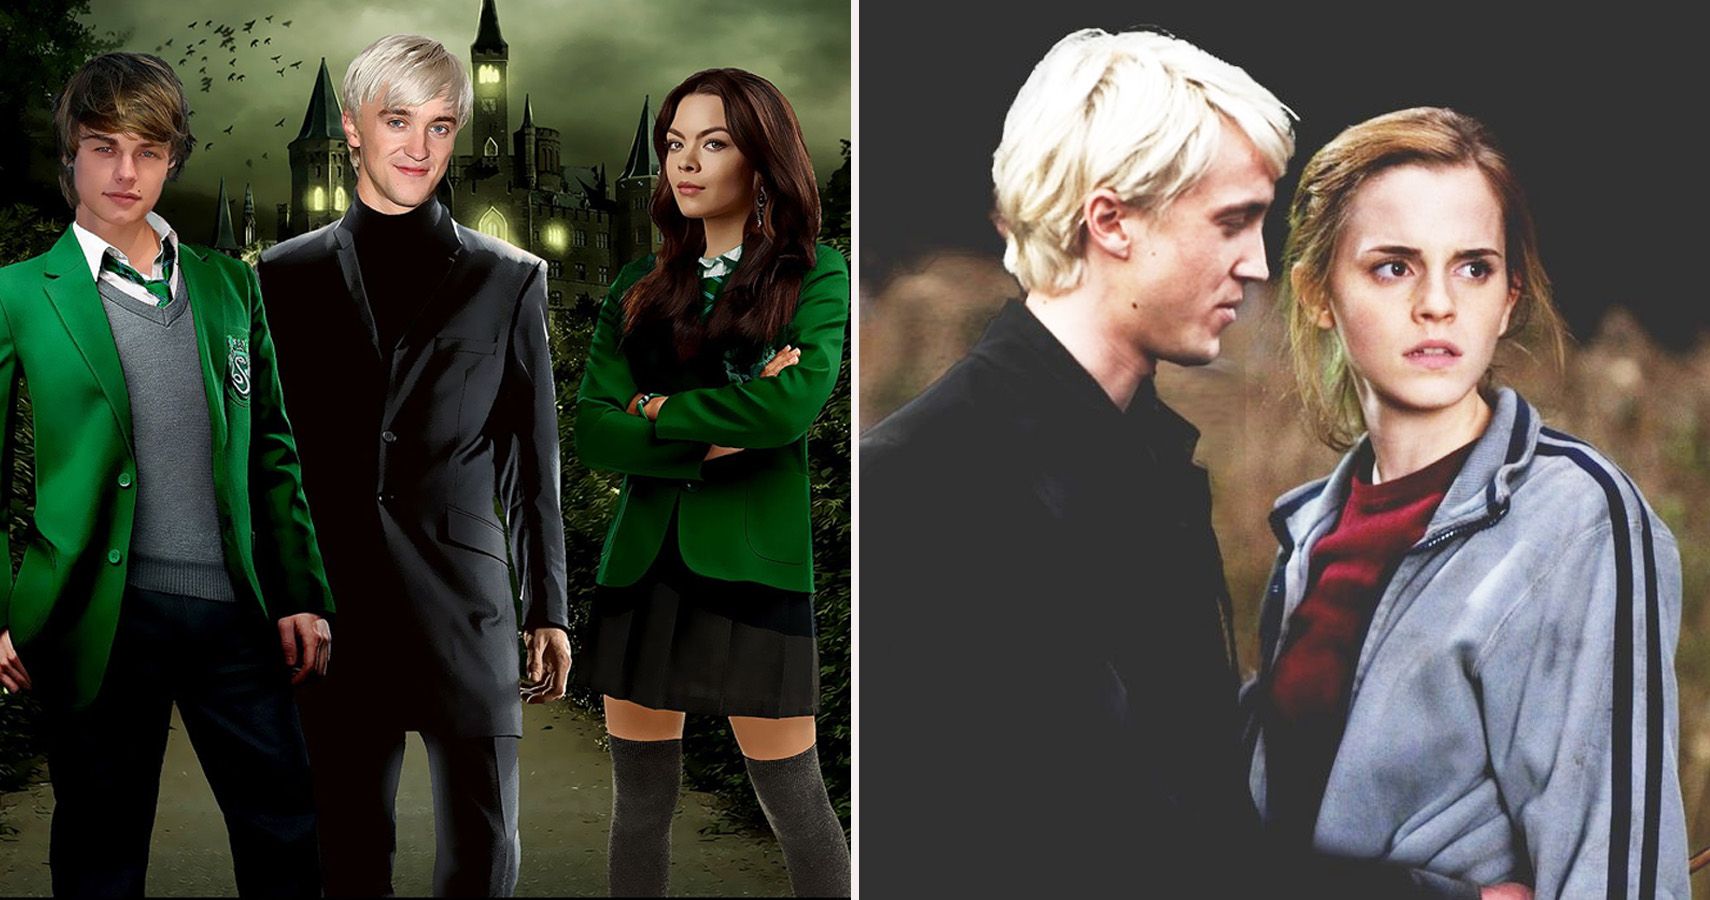 Five differences between the younger Draco Malfoy and the Draco we